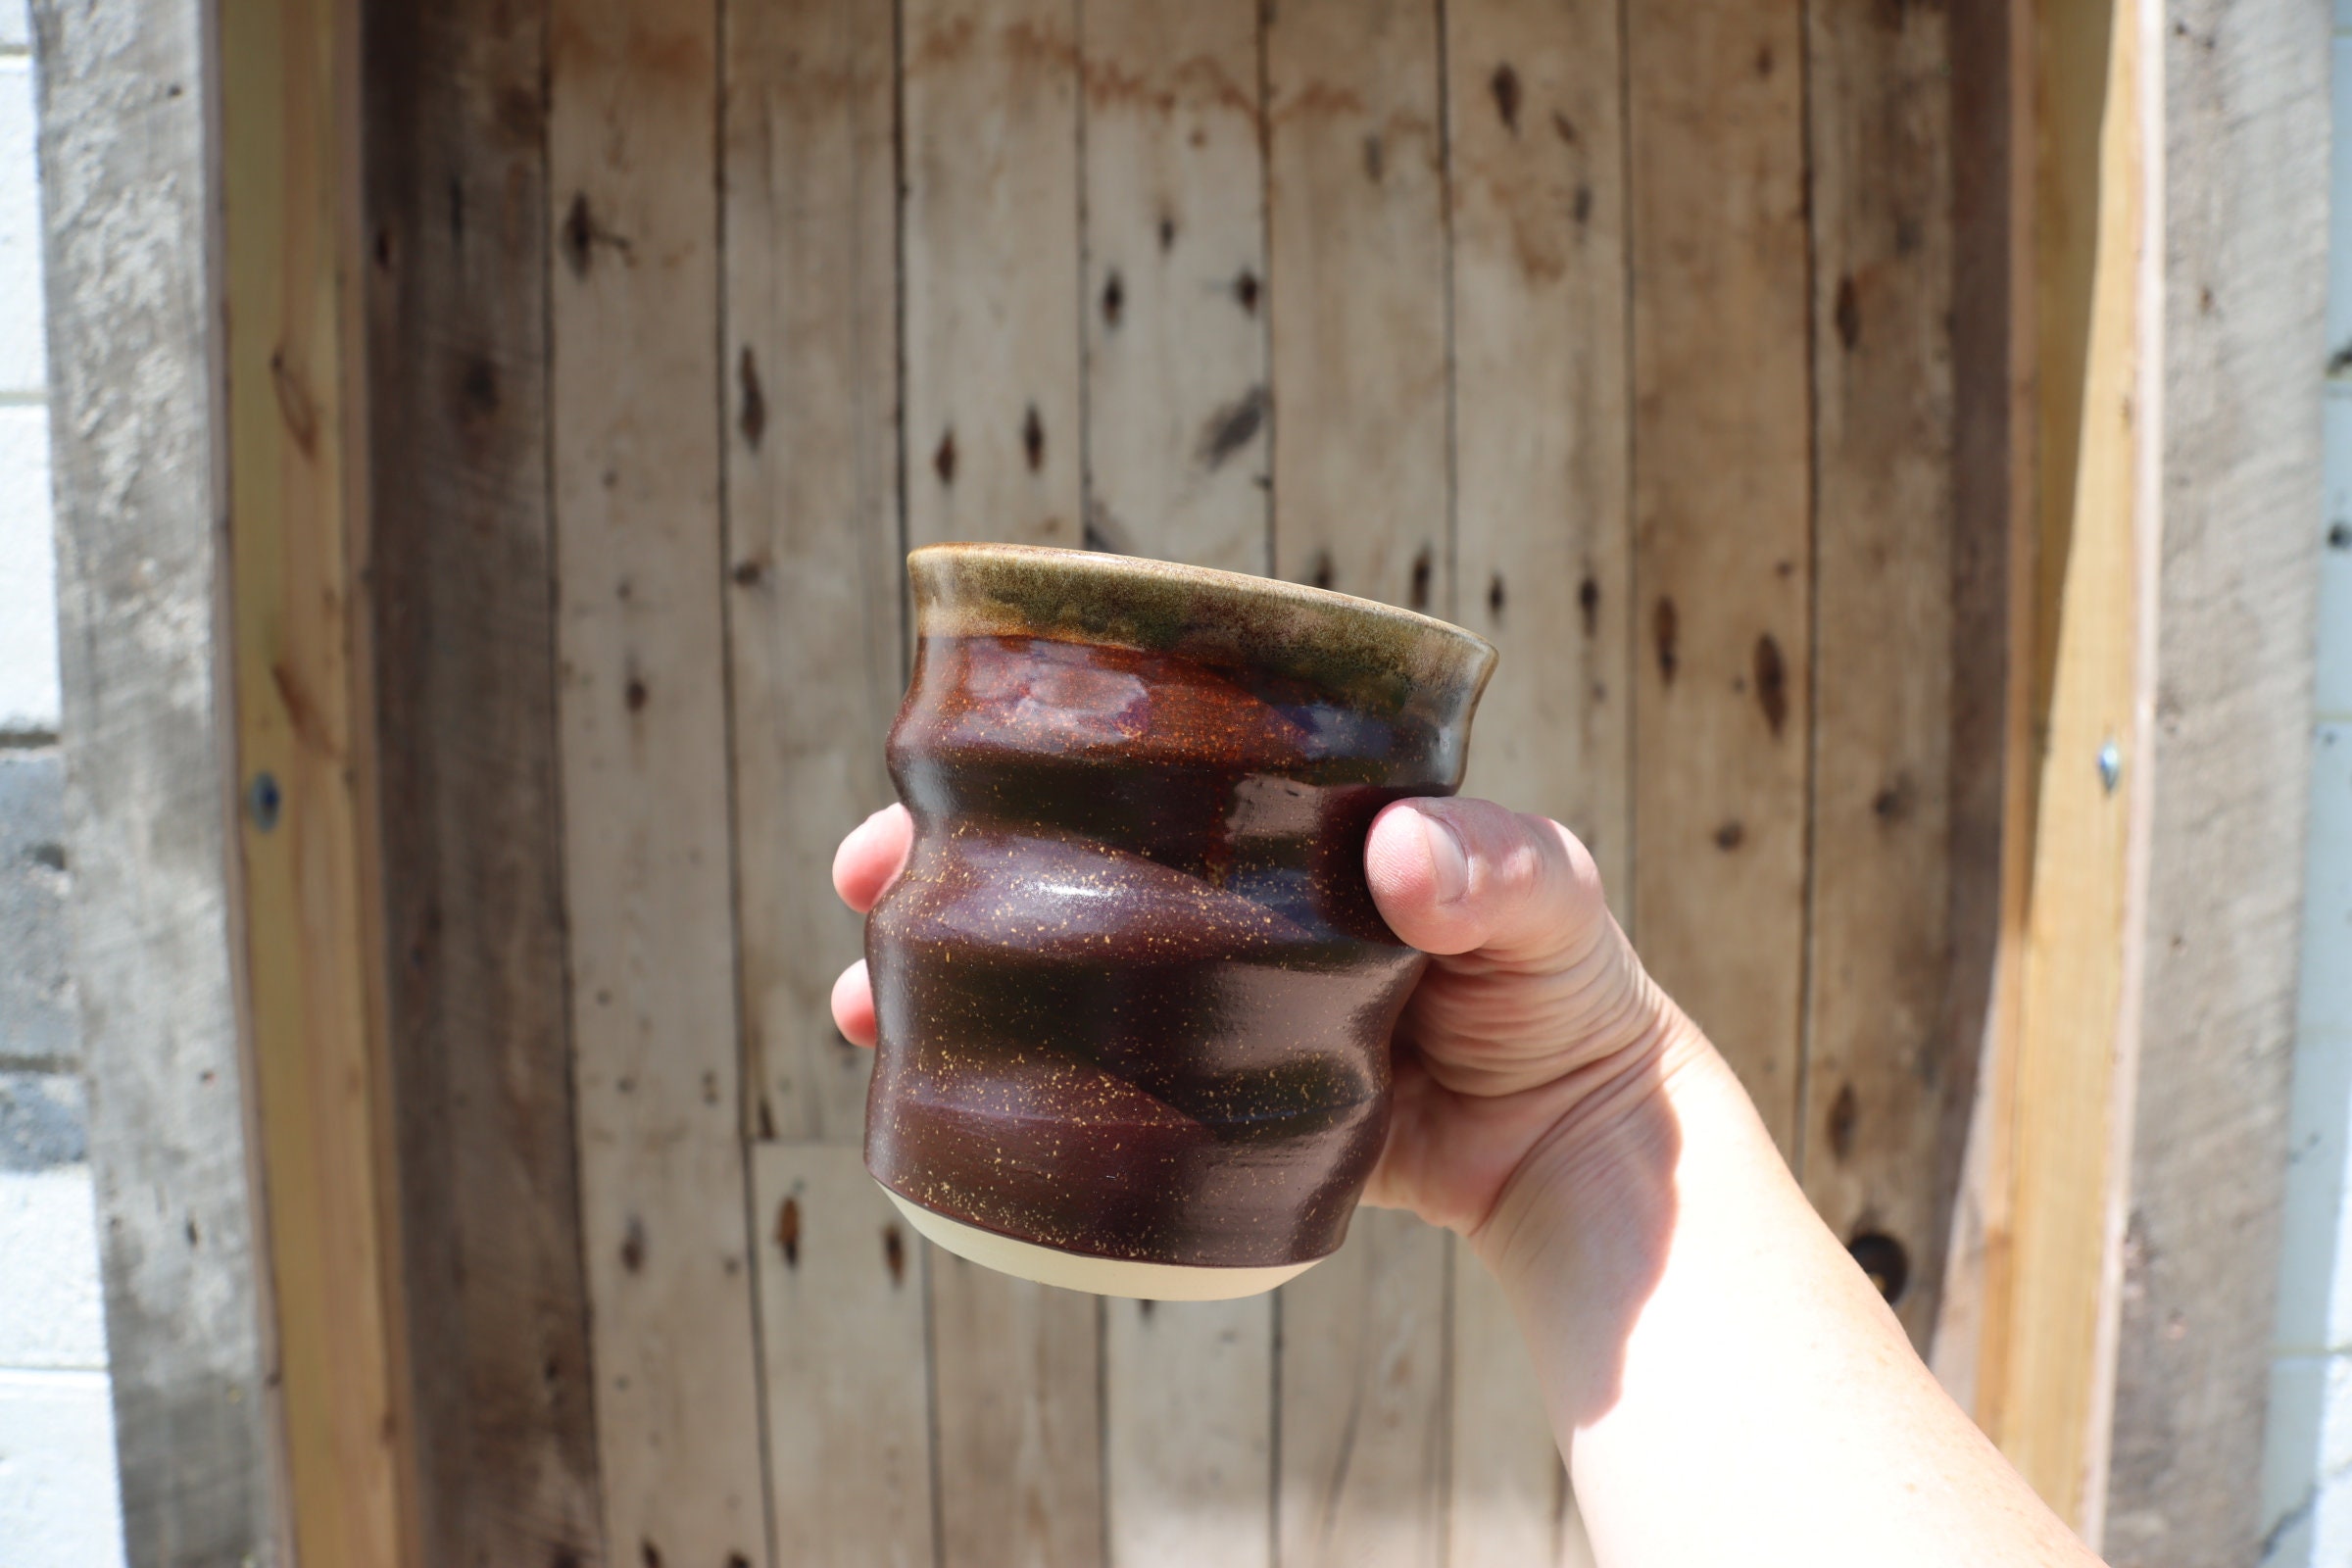 Pottery Tumbler Brown with Green Rim